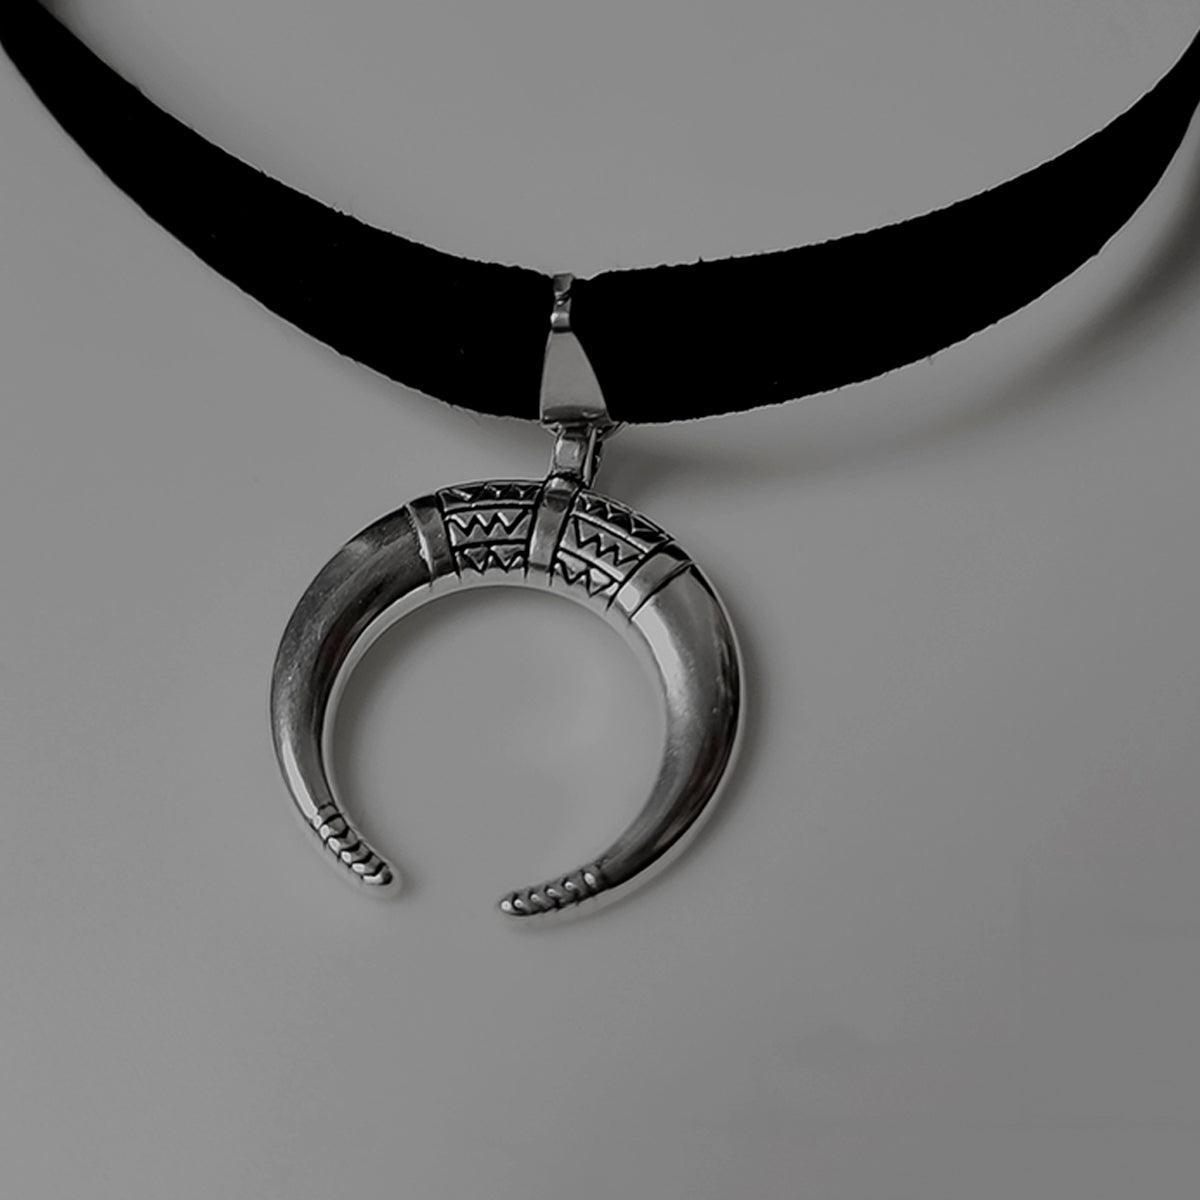 Crescent Moon Tribal Notching Choker Necklace - Aesthetic Clothes Shop